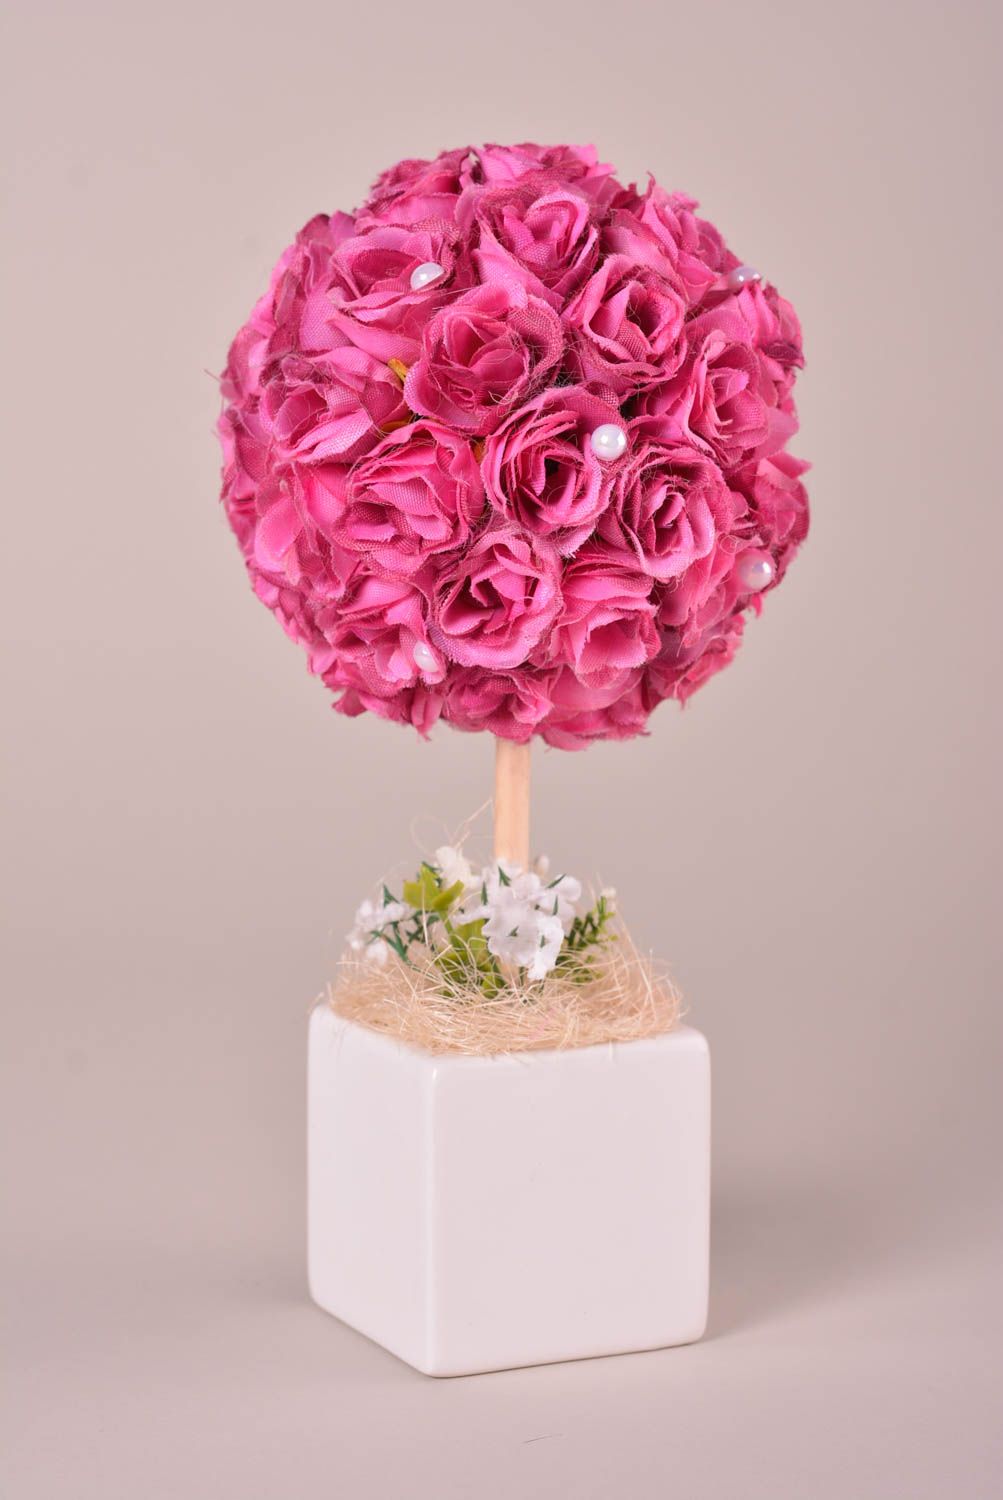 Pink topiary tree artificial designer tree romantic present decorative use only photo 1